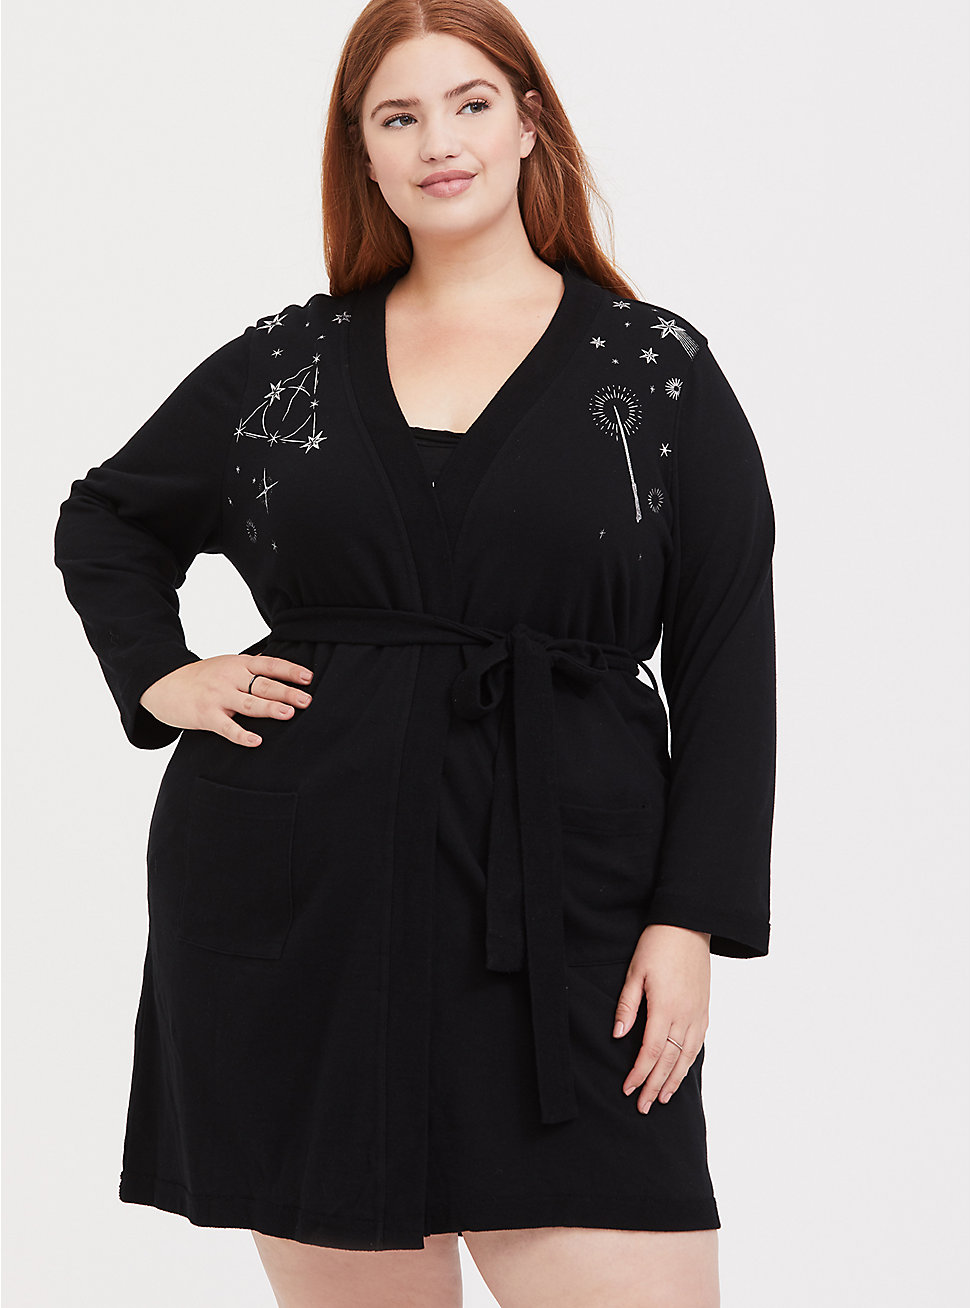 Torrid Just Released A Size-Inclusive Harry Potter 